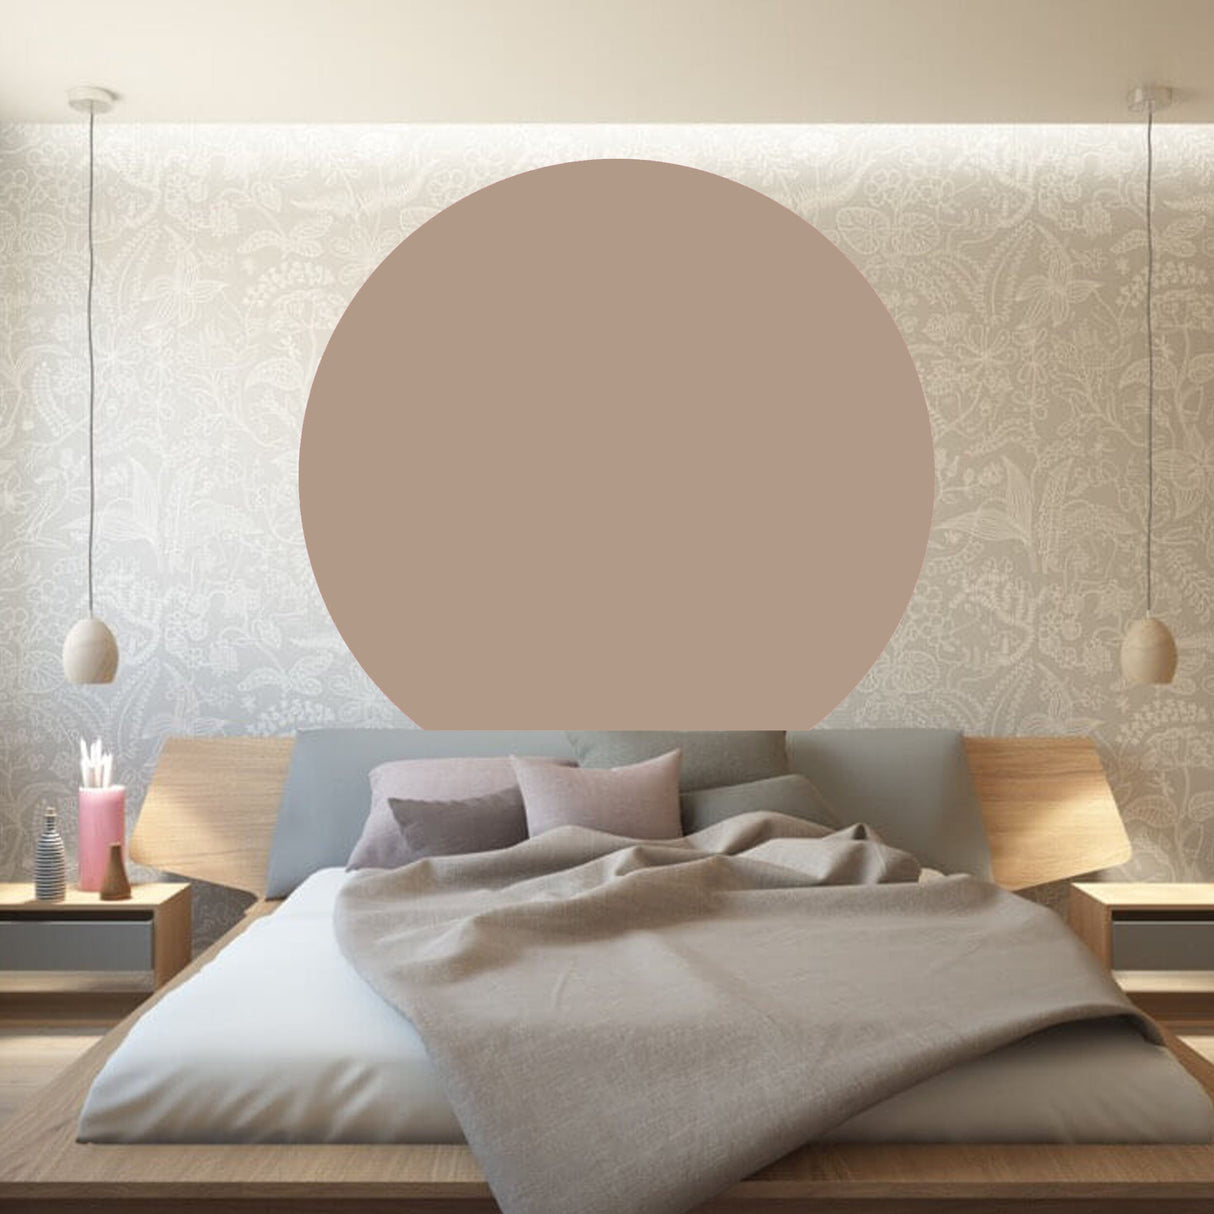 Circle Boho Wall Decal - Round Bedroom Bed Arch Headboard Modern Sticker